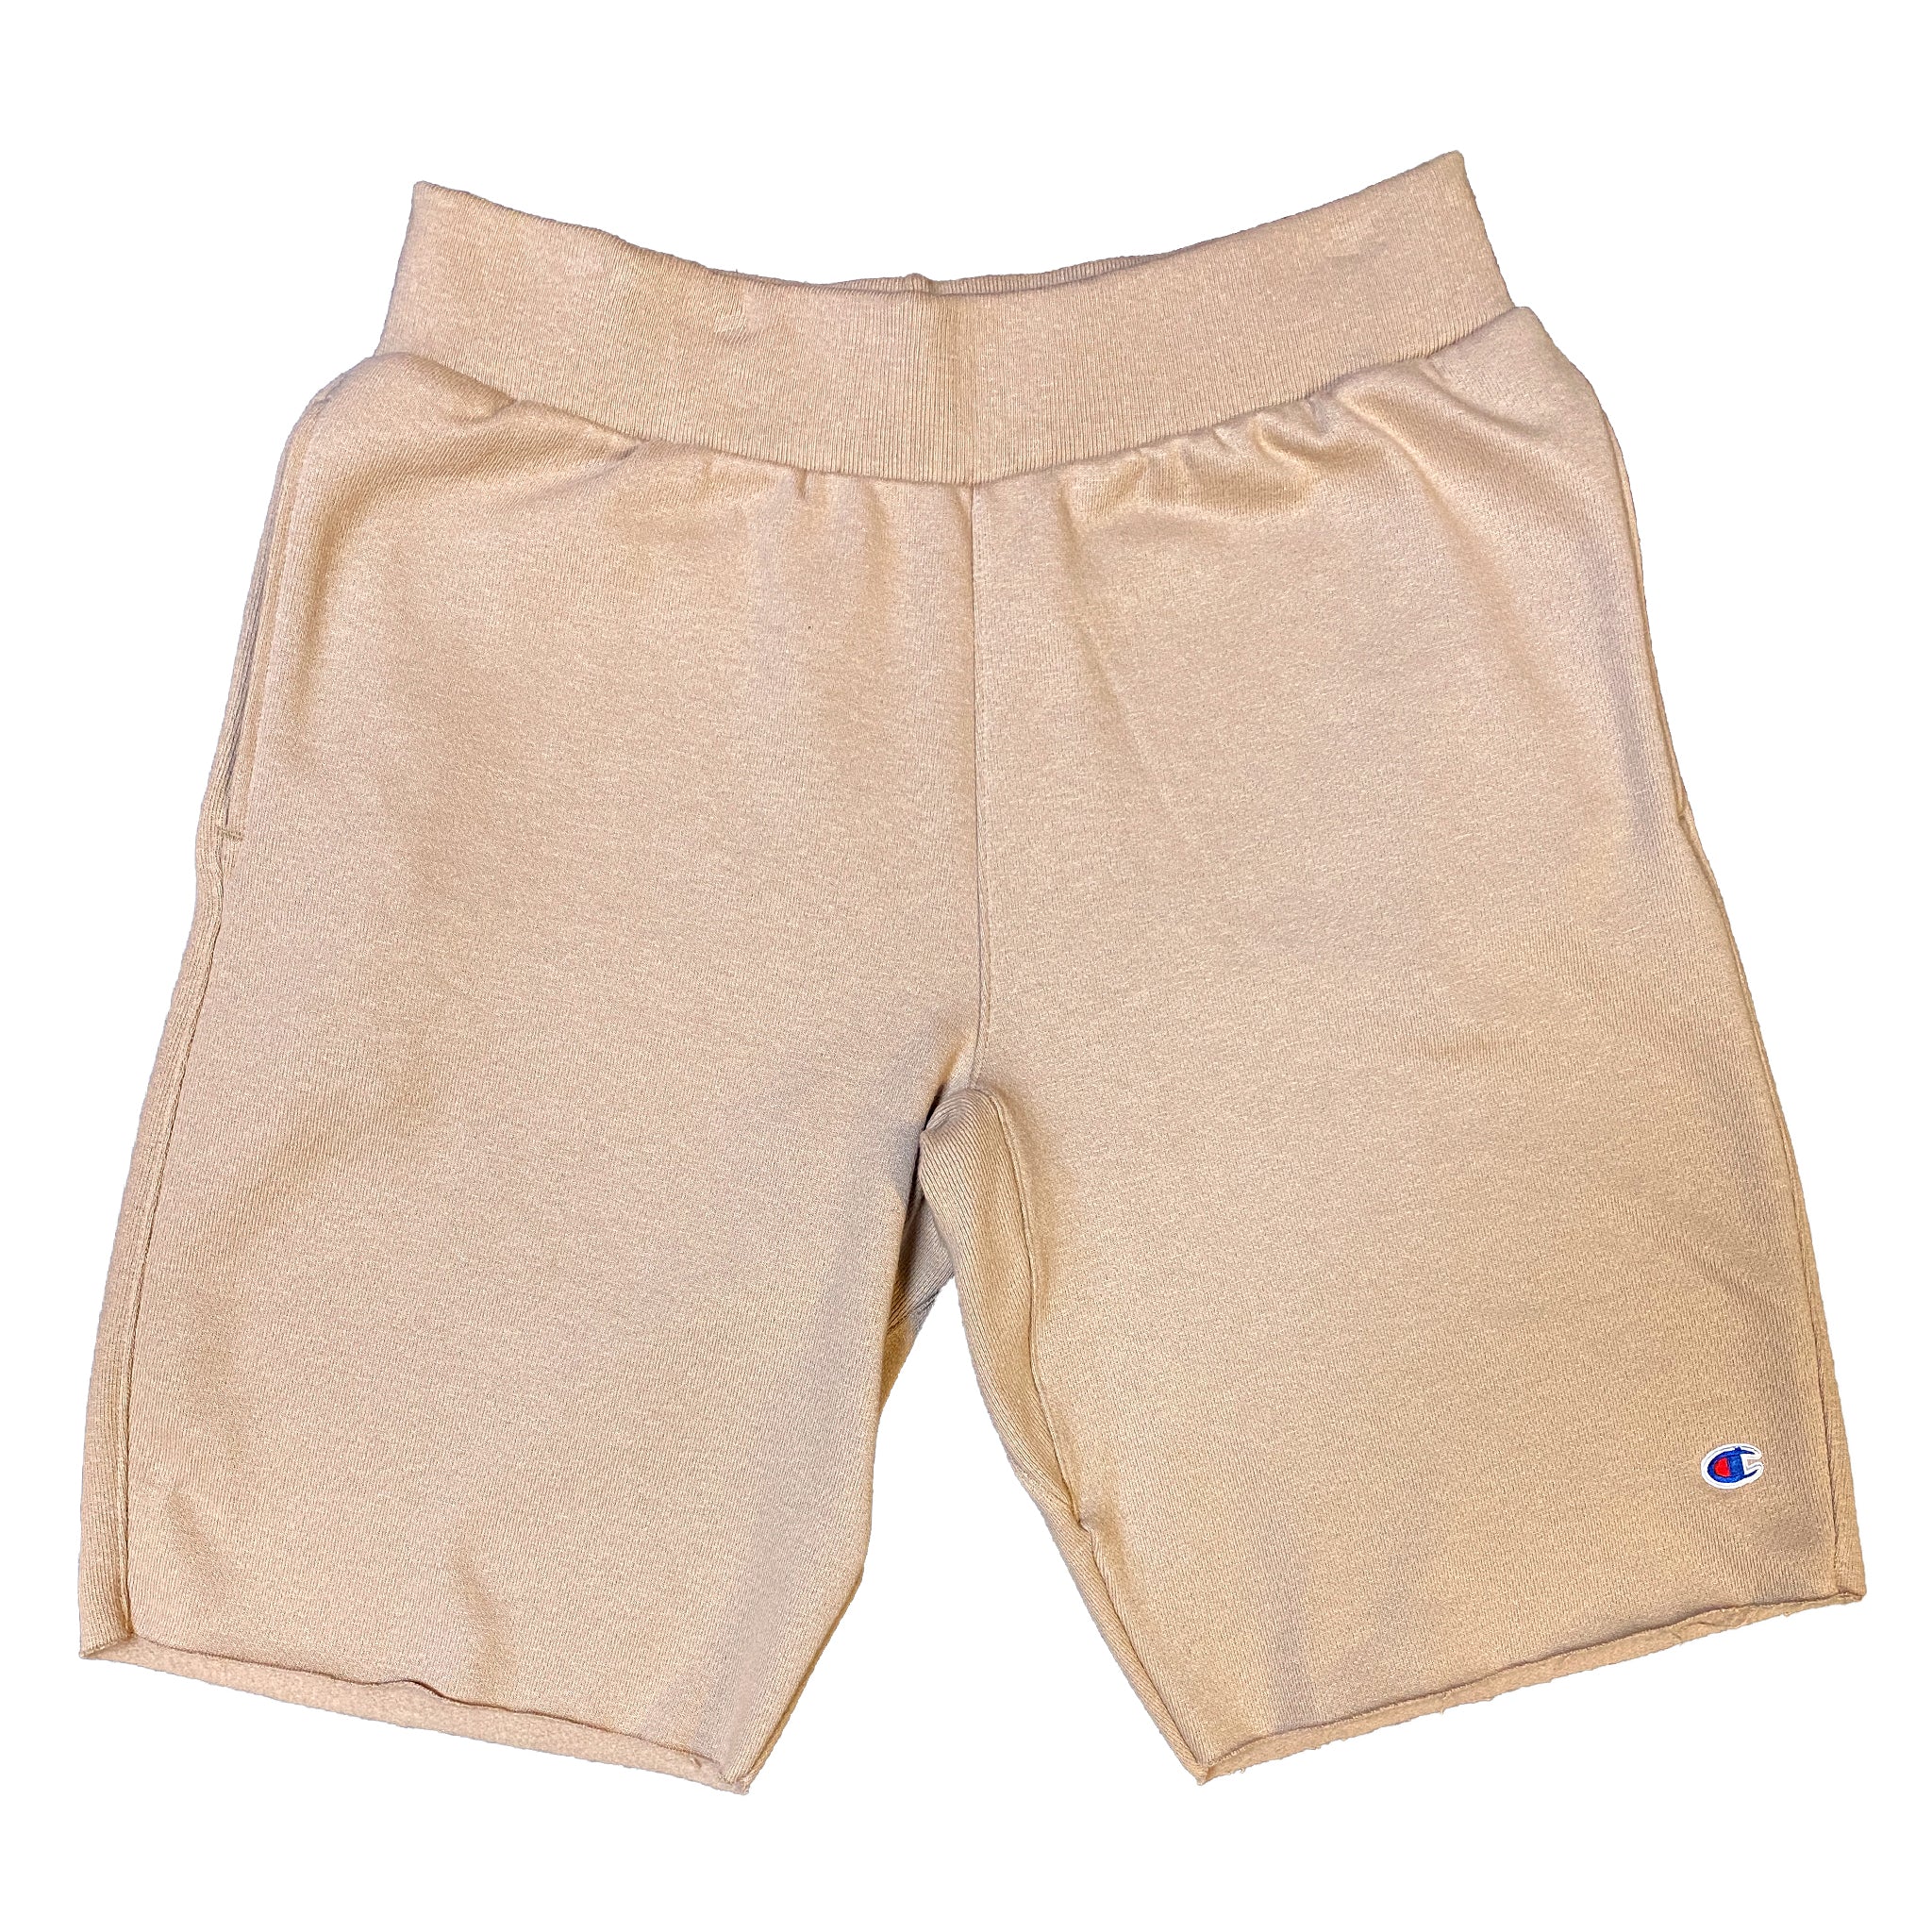 Champion Men's Reverse Weave Cut Off Shorts – That Shoe Store and More